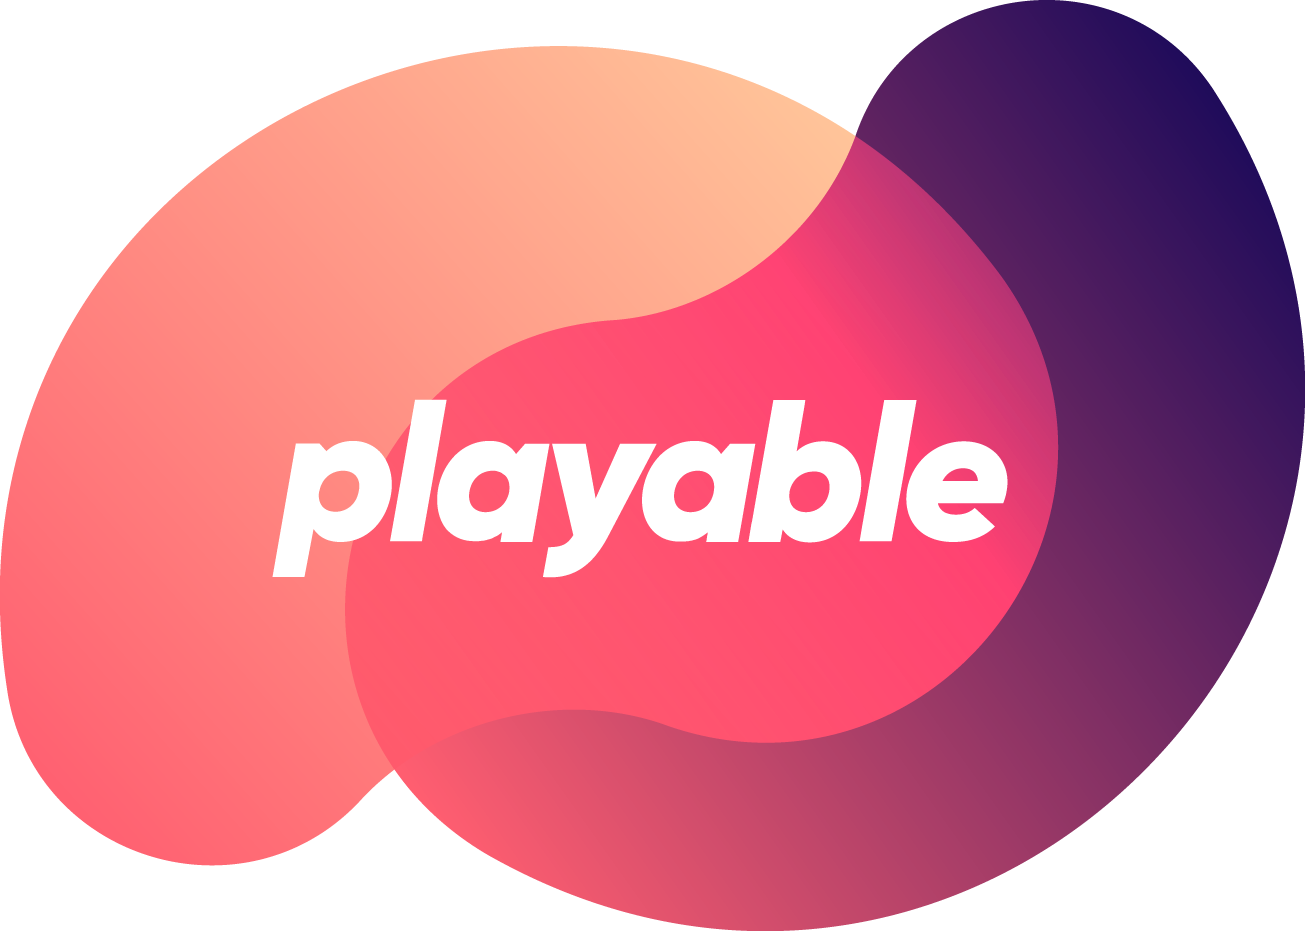 now lets you play games on the platform through 'Playables